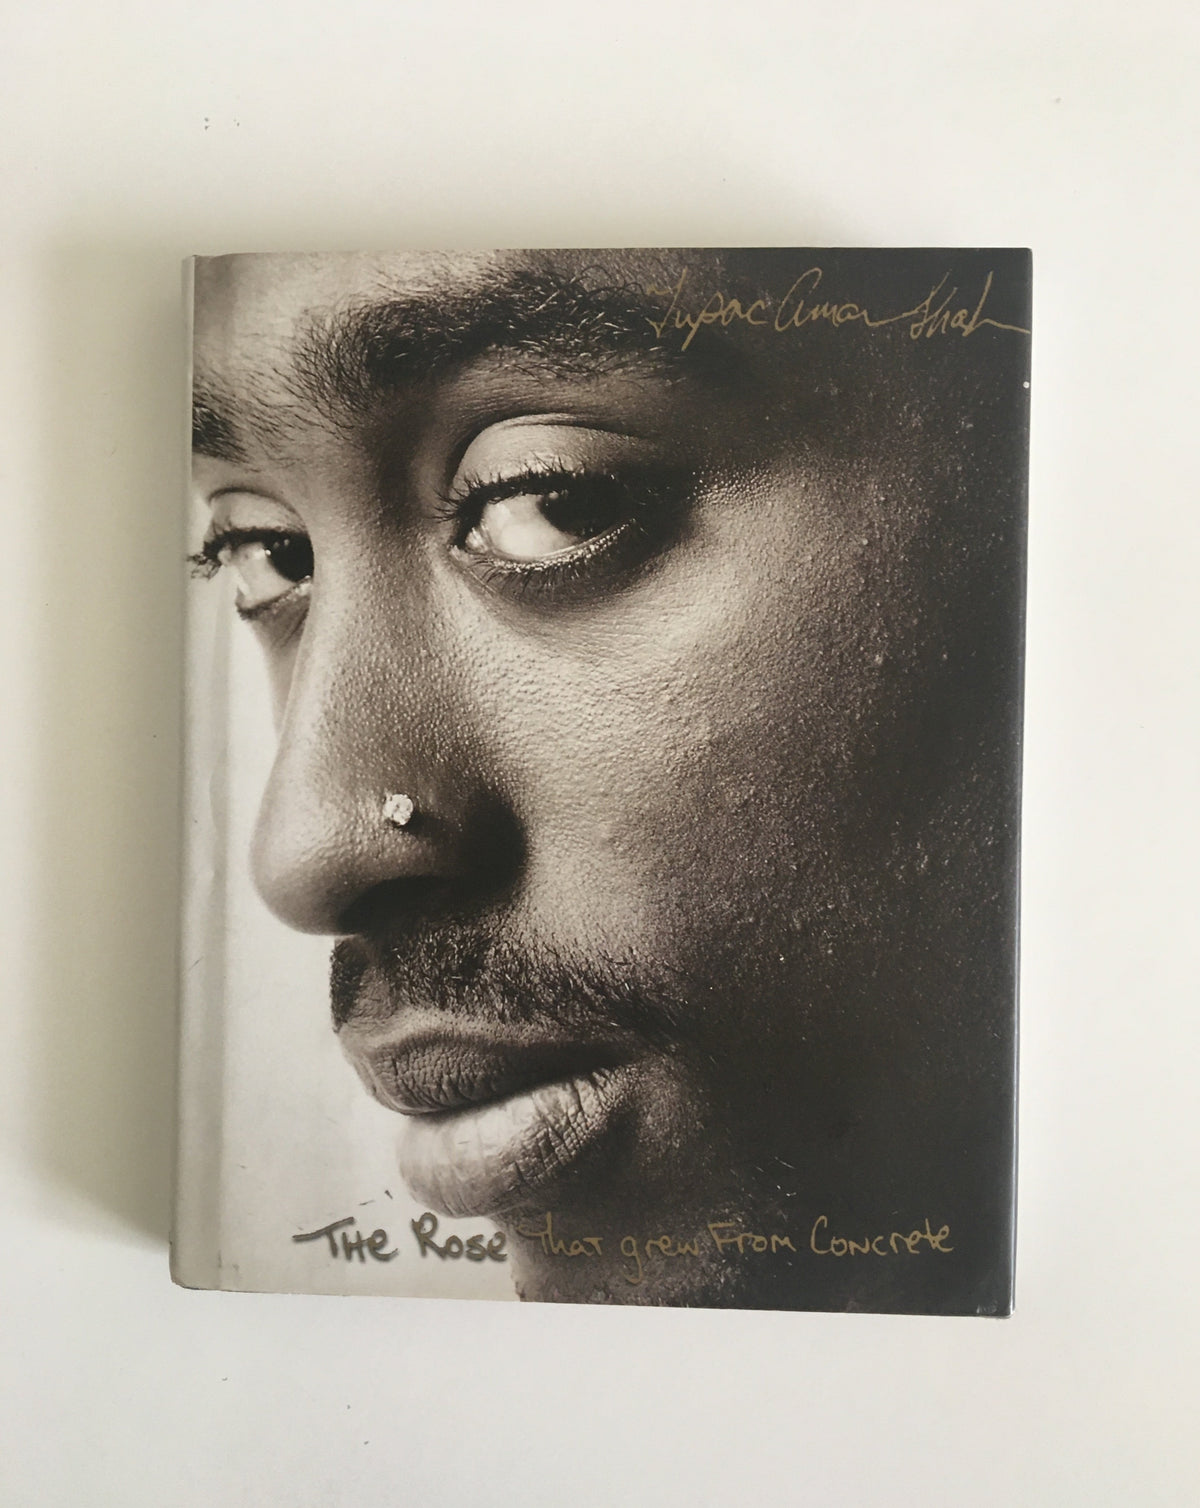 The Rose That Grew From the Concrete by Tupac Shakur